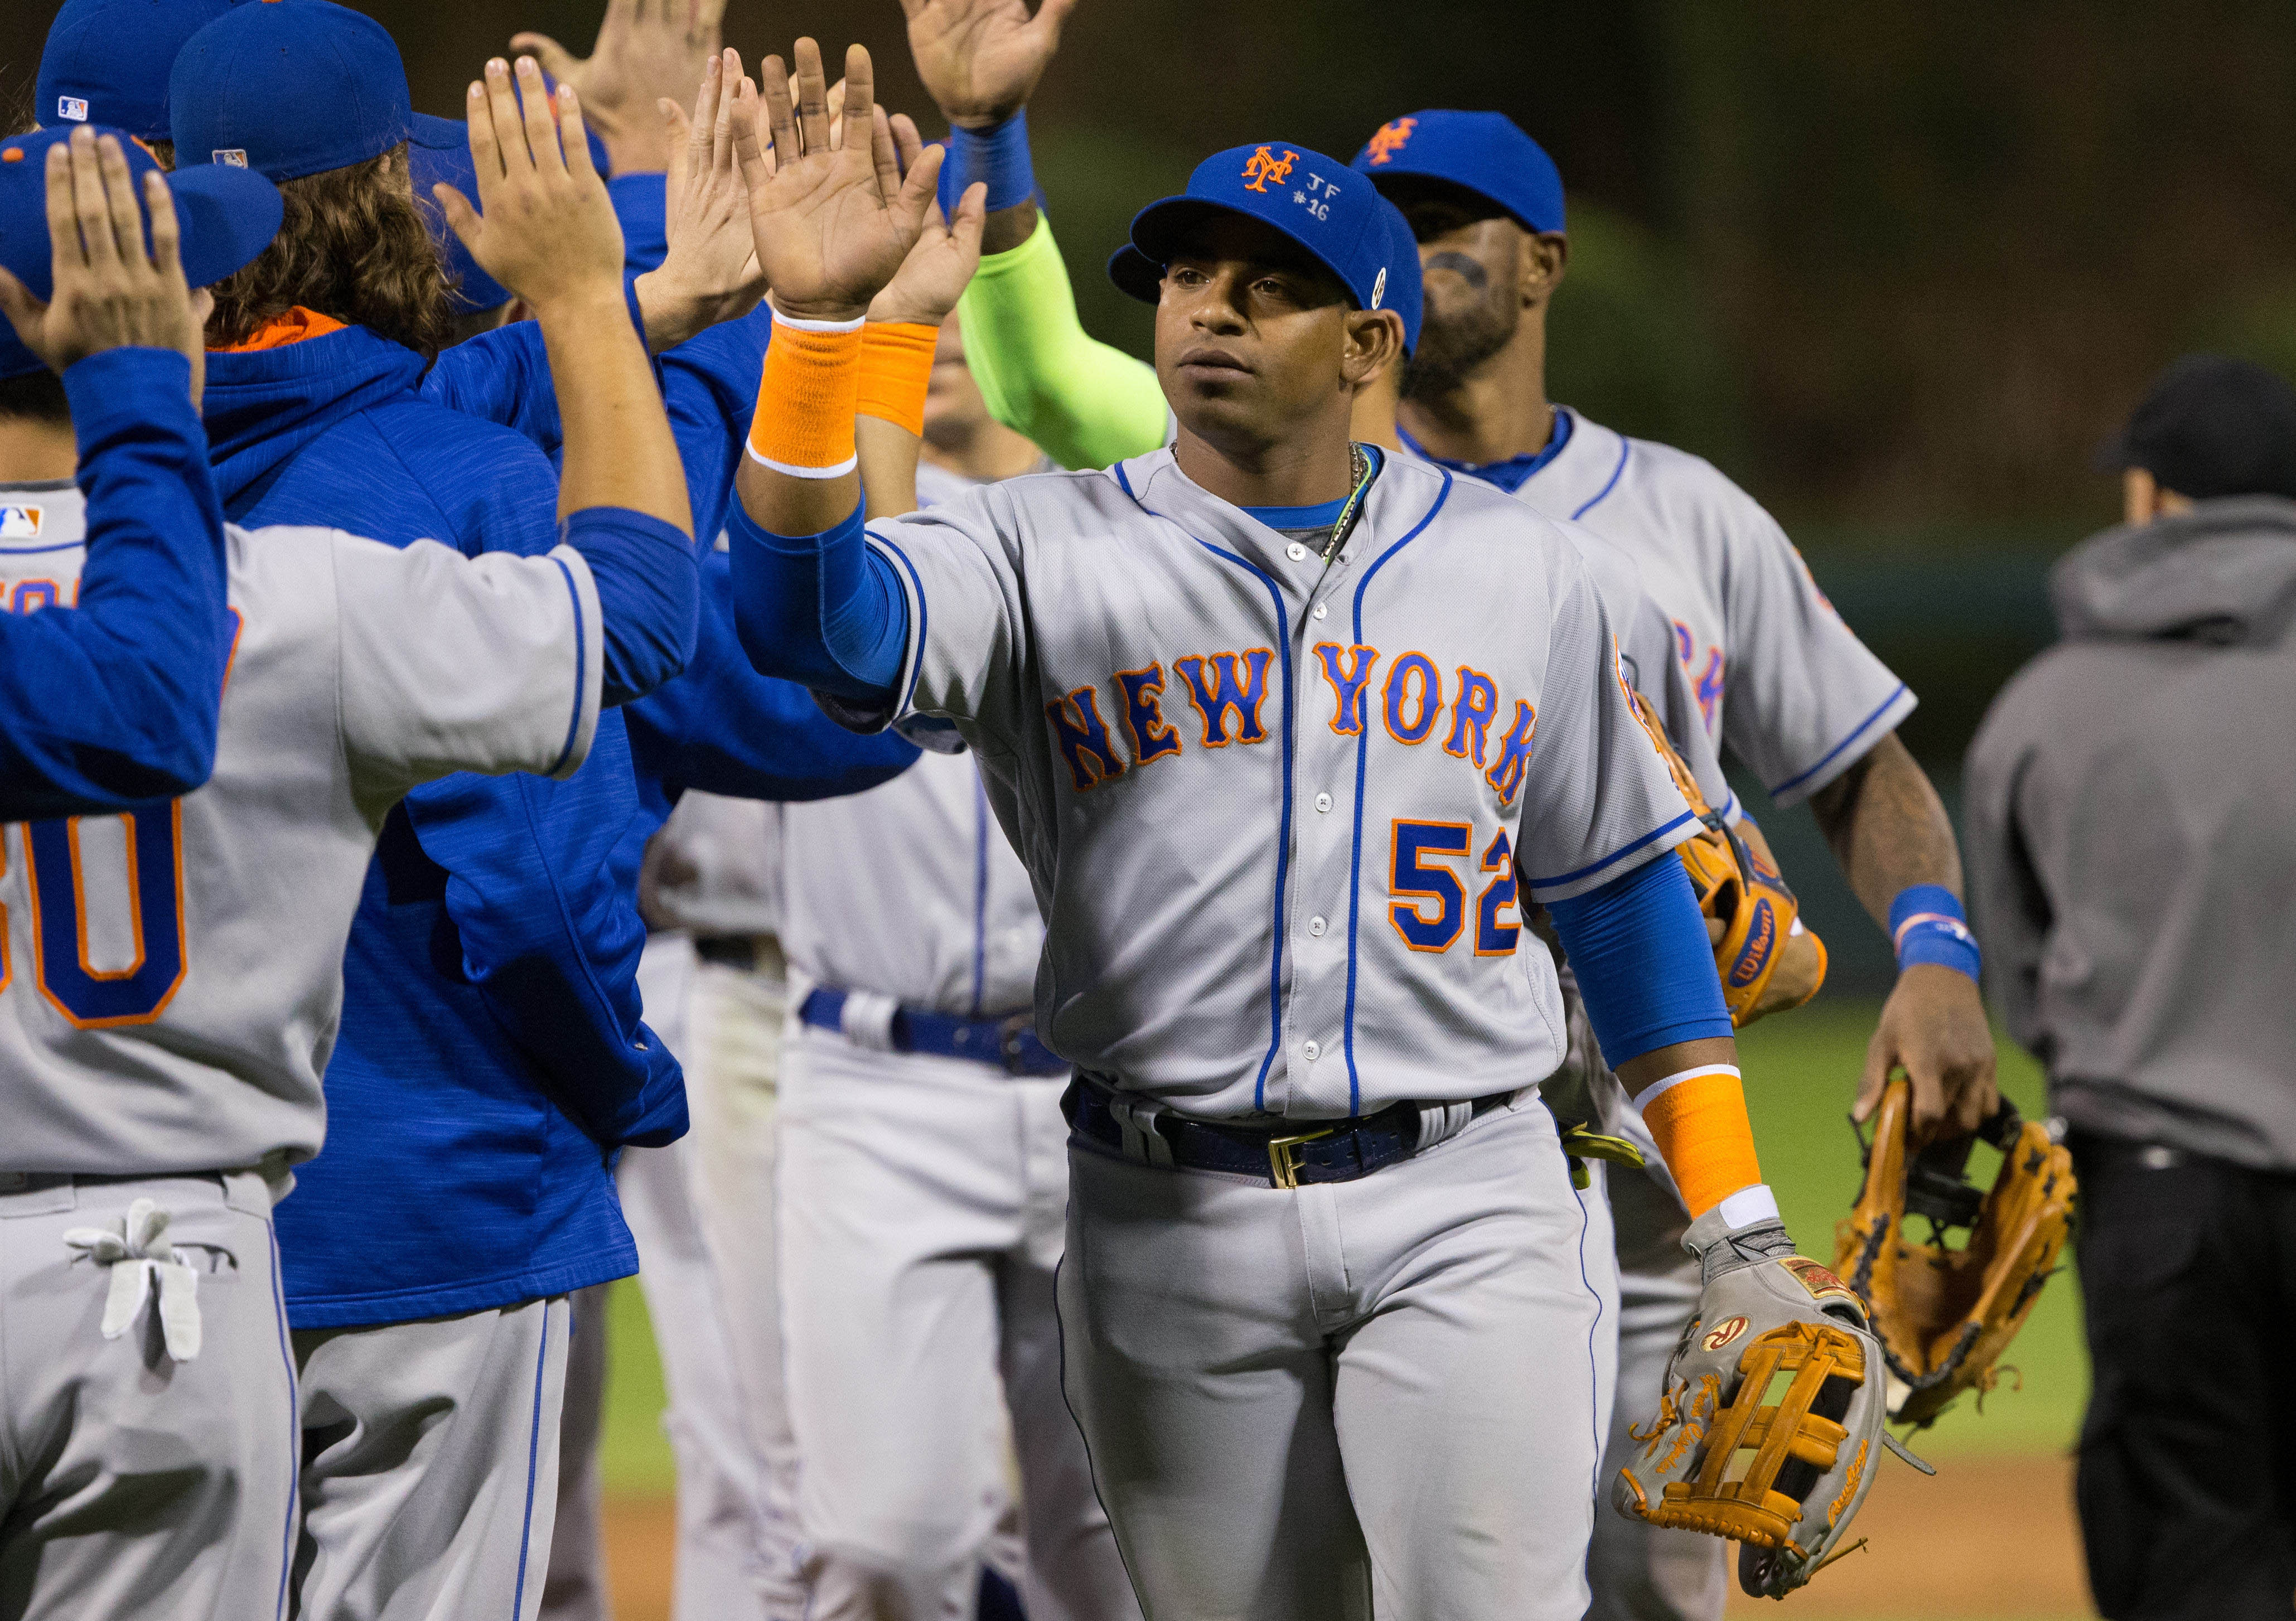 New York Yankees: Signing Yoenis Cespedes Would Be A Terrible Move 1